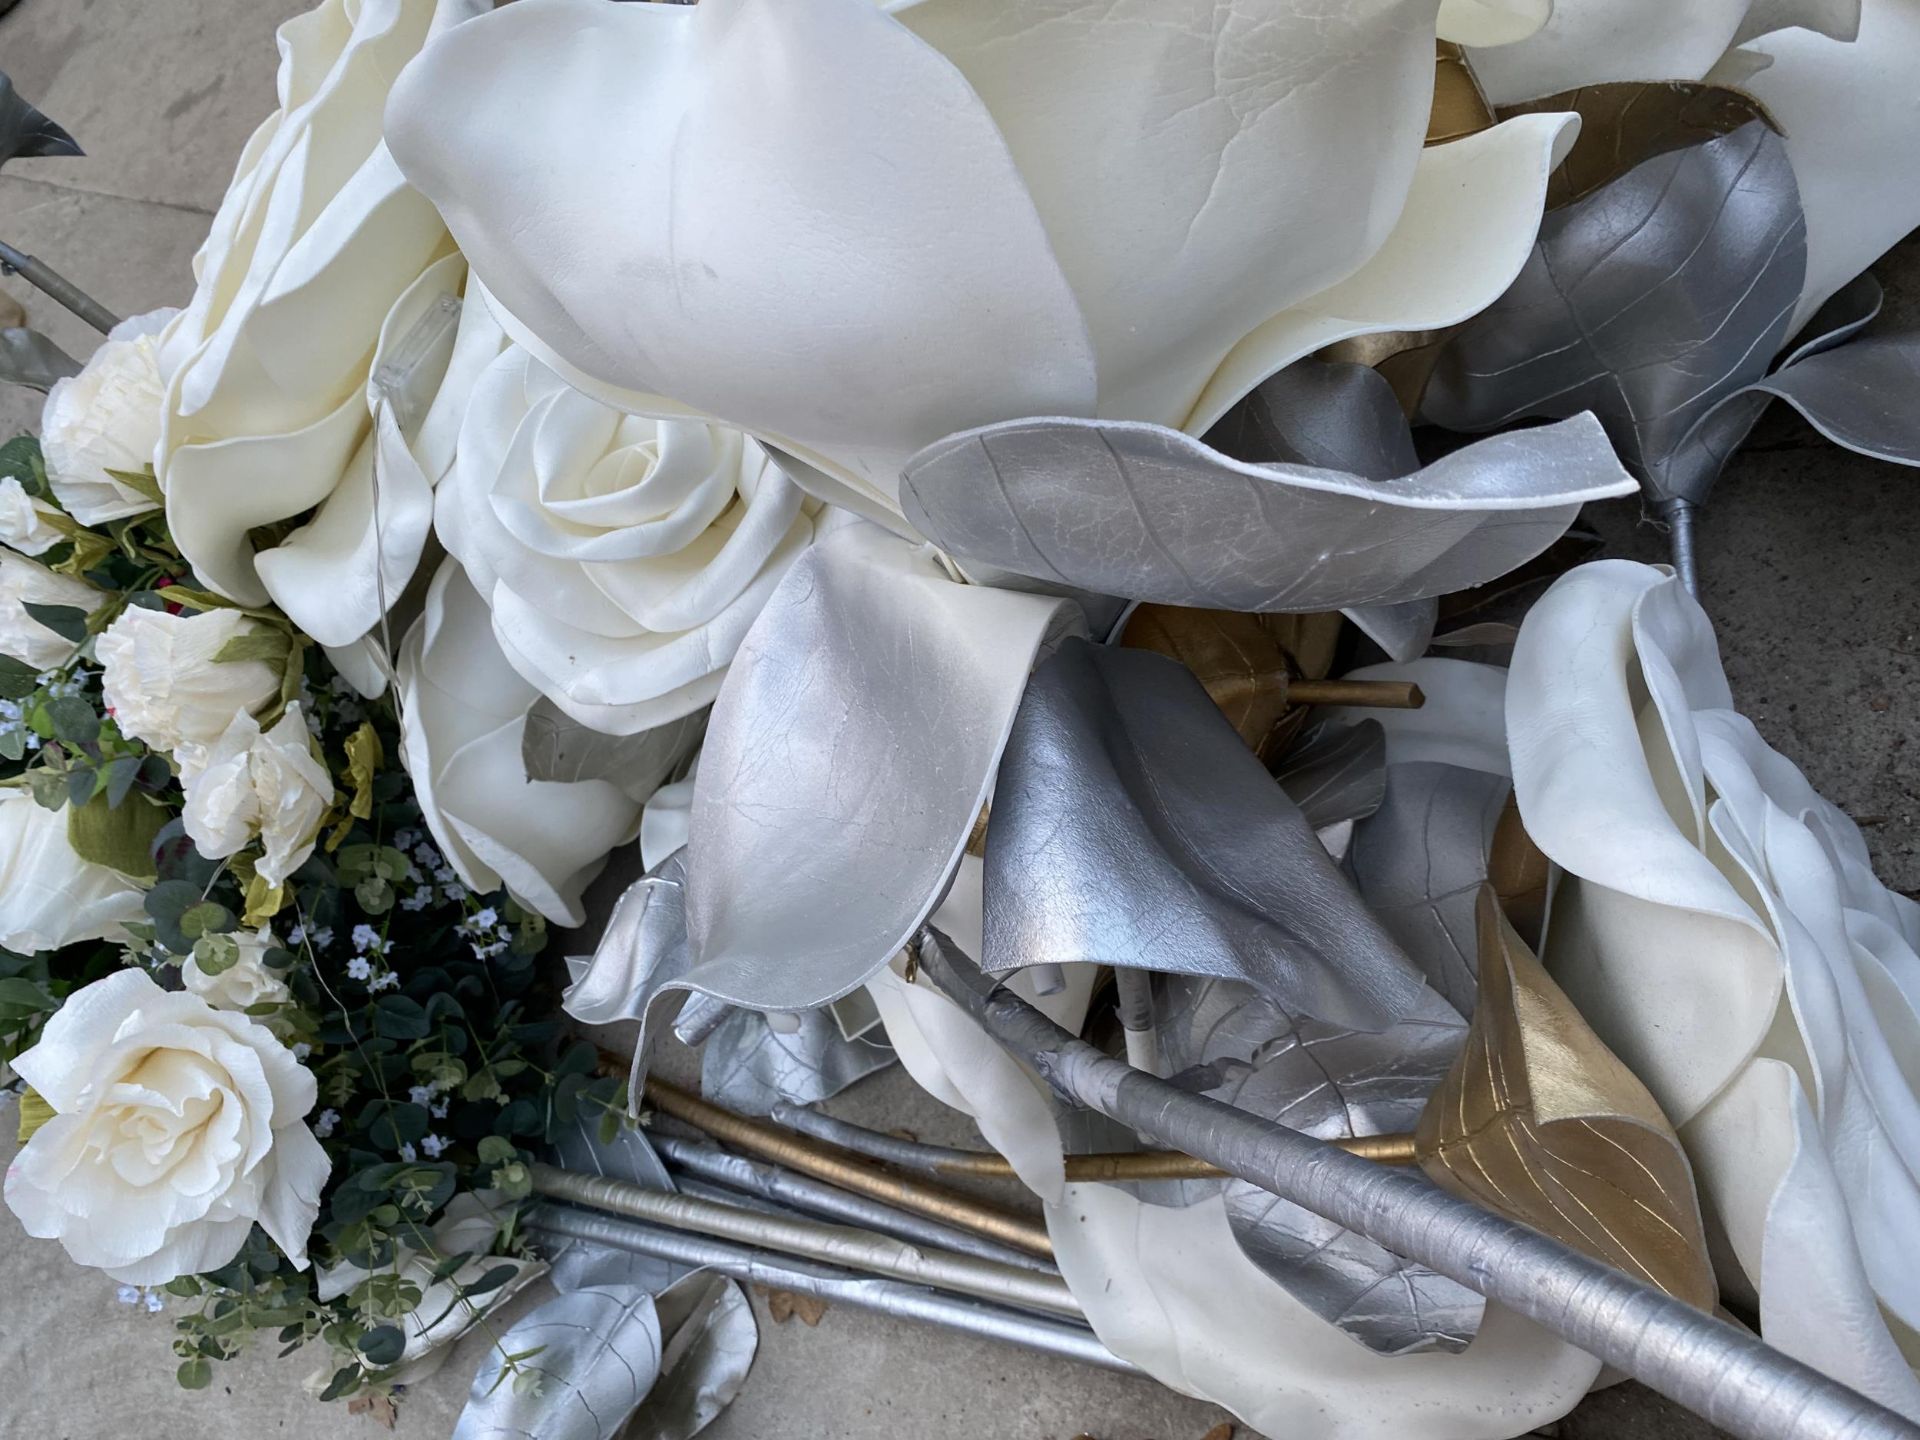 A LARGE QUANTITY OF ARTIFICIAL WEDDING FLOWERS AND DECORATIONS - Image 8 of 10